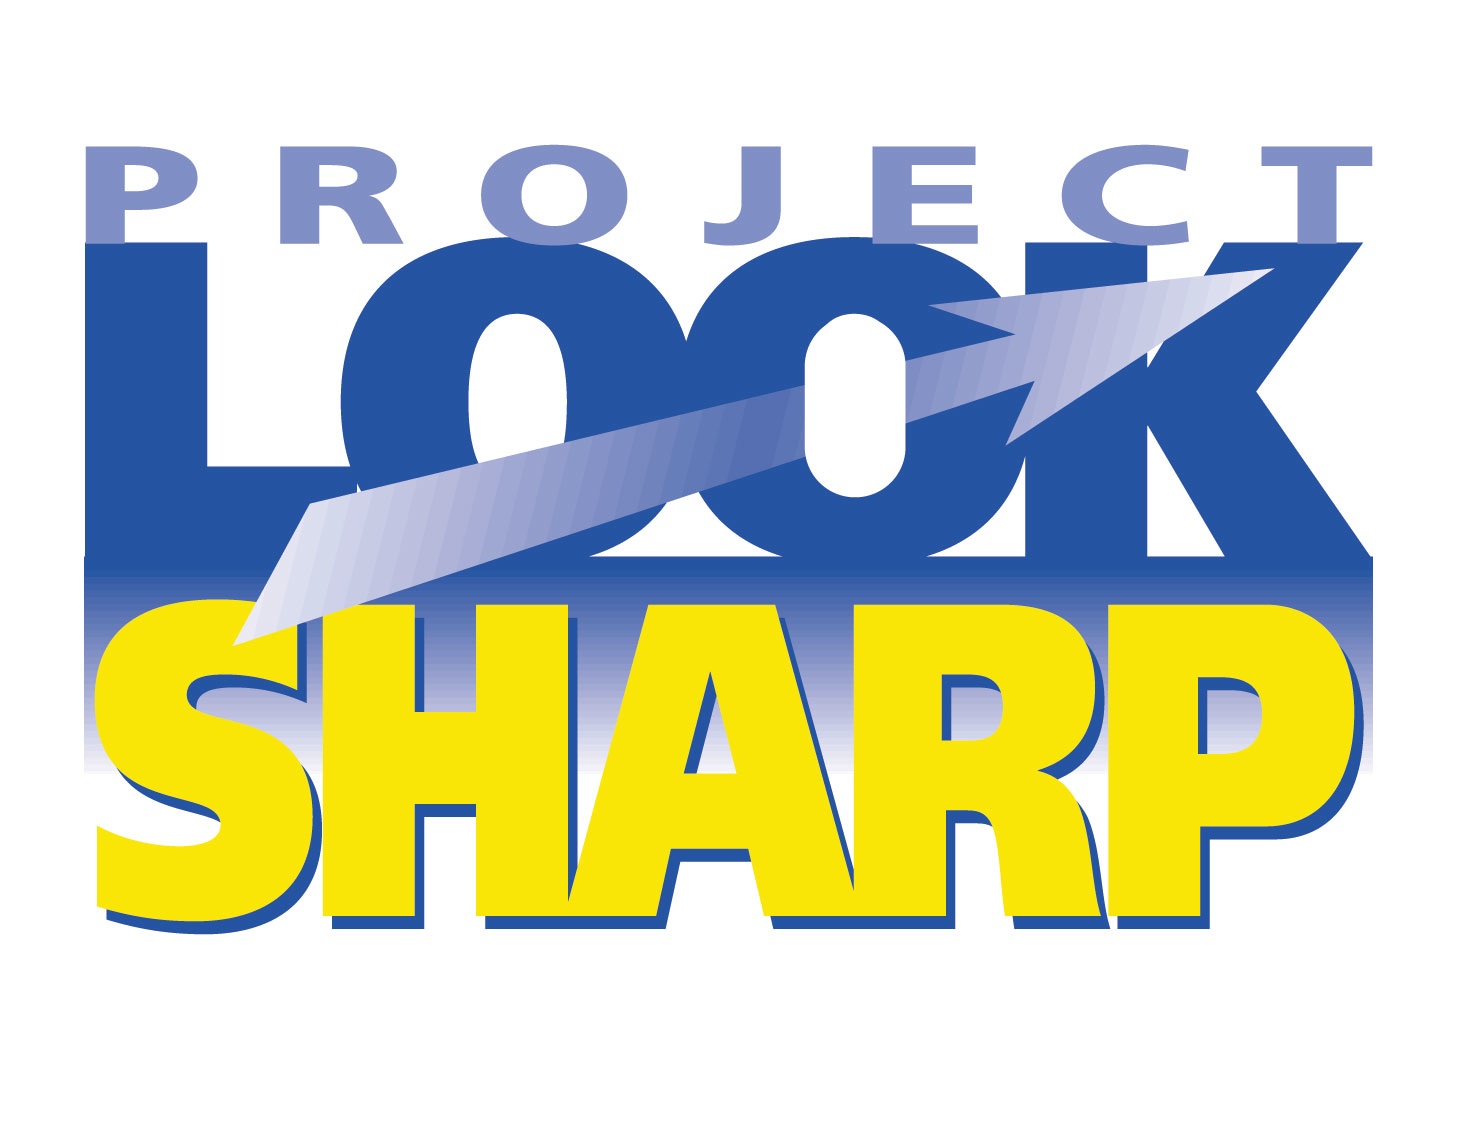 Project Look Sharp